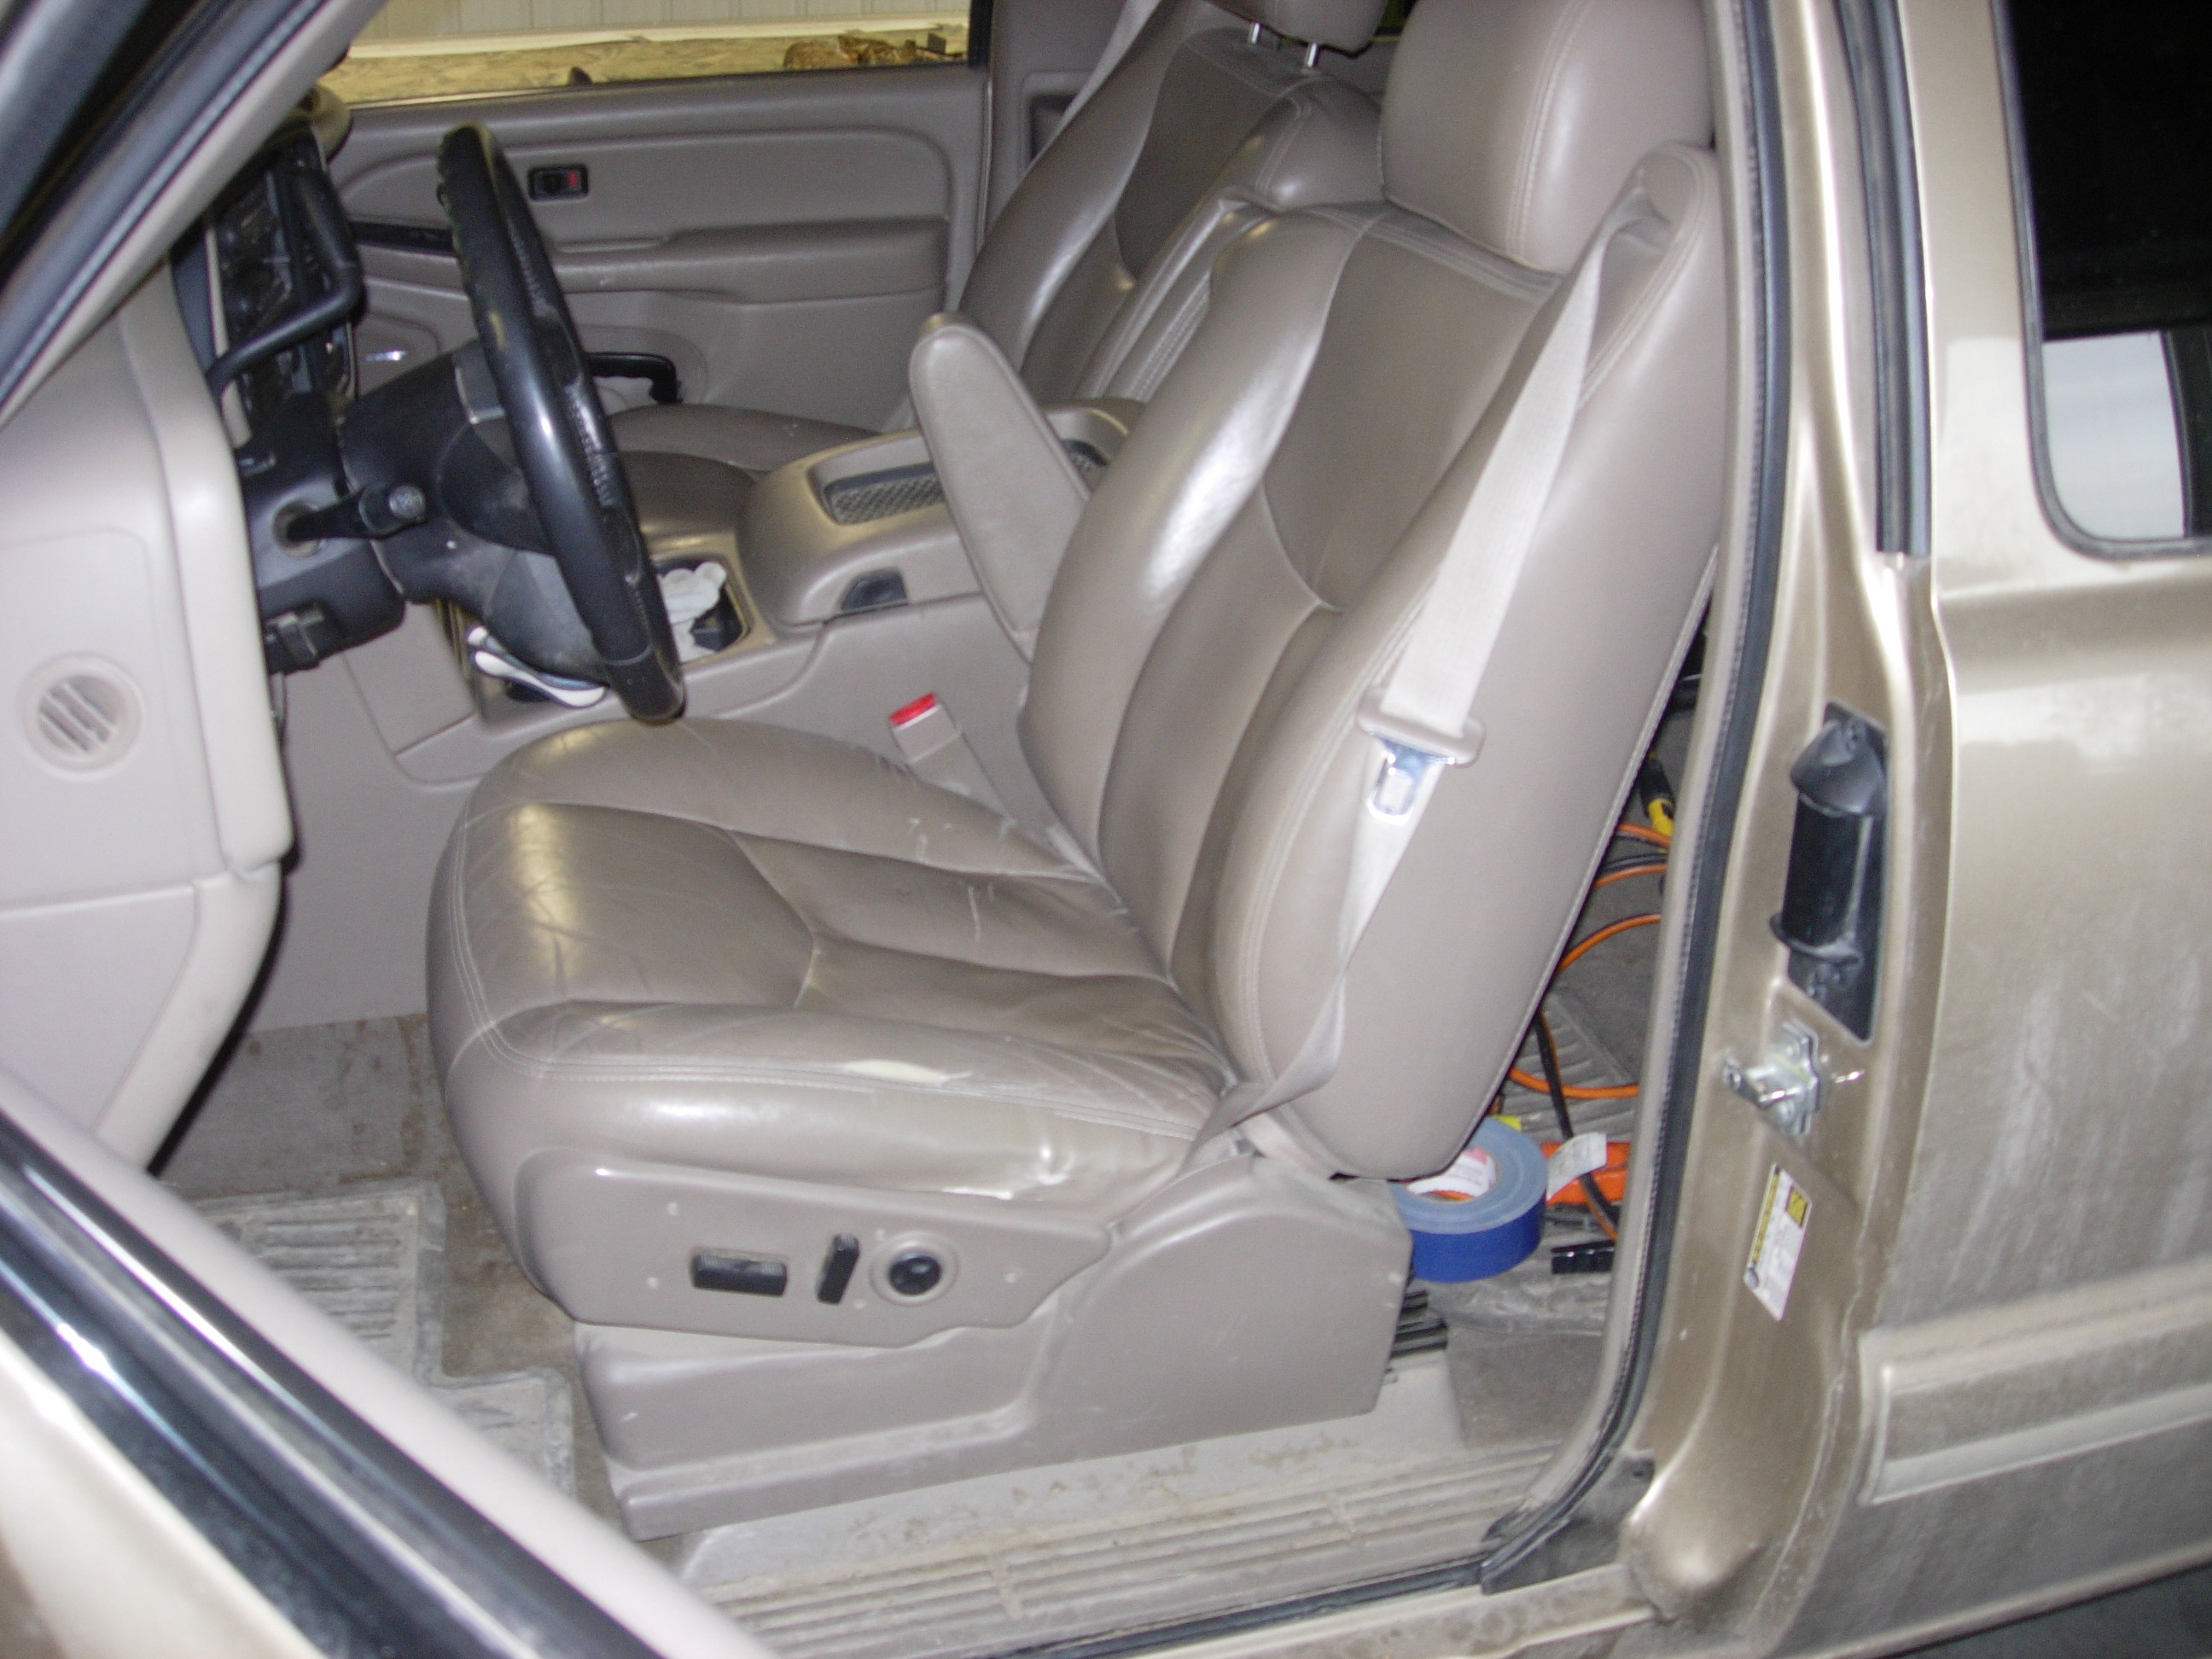 2003 chevy suburban seat covers